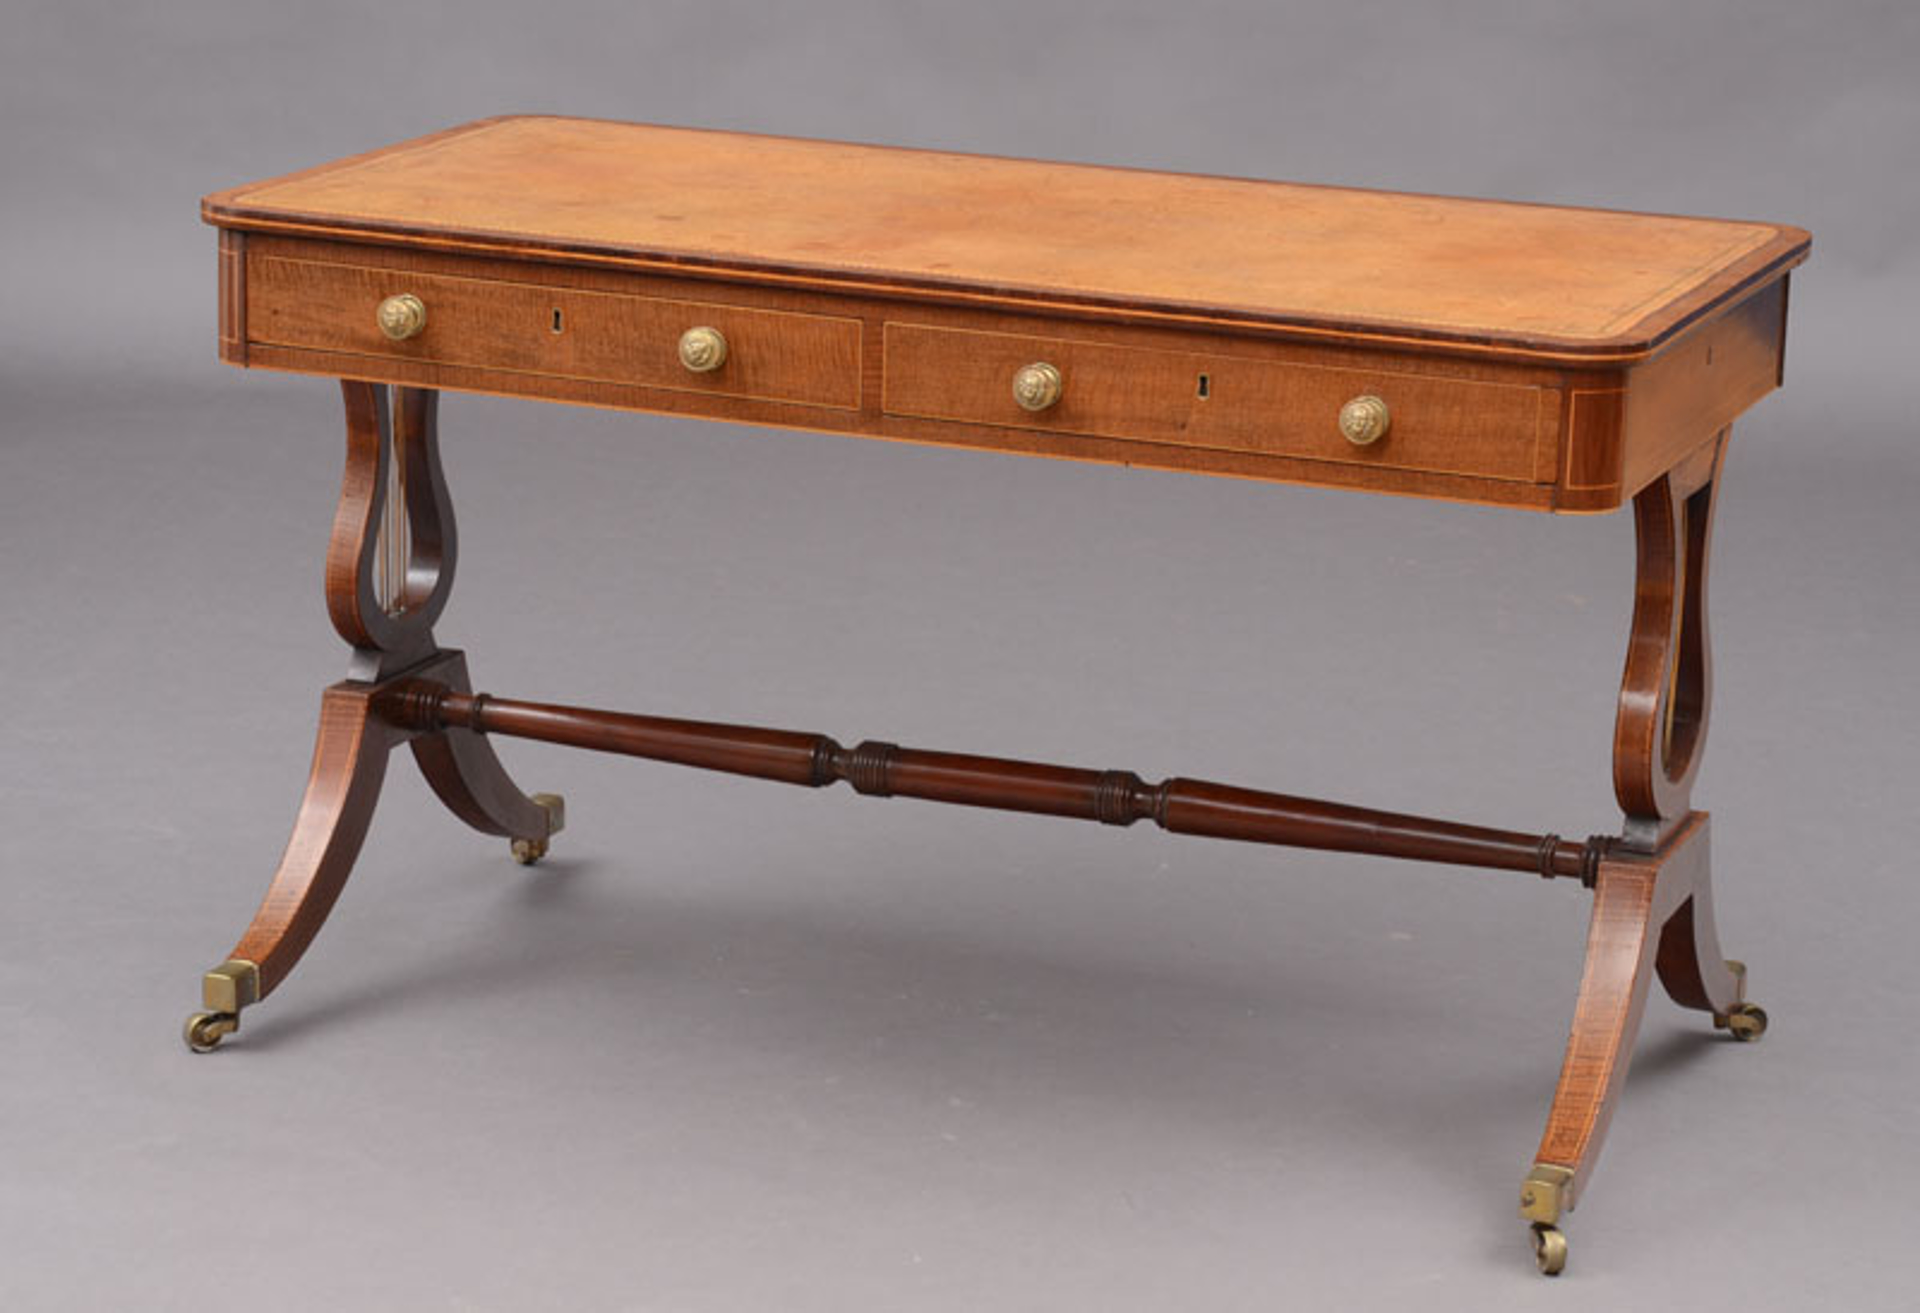 FINE REGENCY HAREWOOD INLAID LIBRARY TABLE